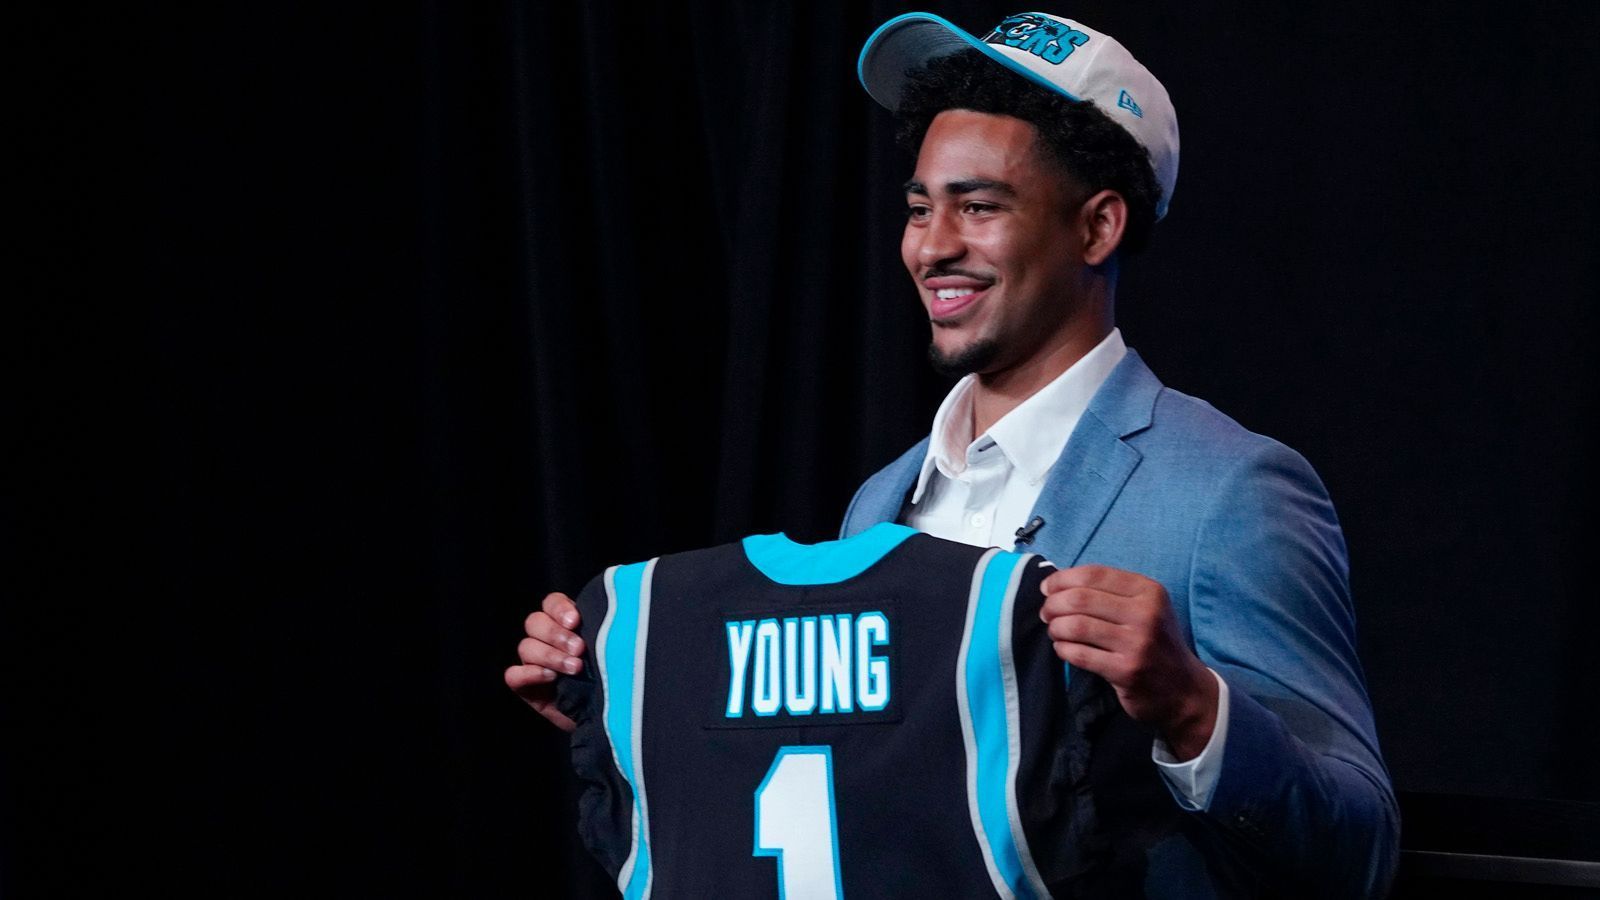 
                <strong>Bryce Young (Carolina Panthers)</strong><br>
                &#x2022; <strong>University of Alabama</strong>: Psychologie (ohne Abschluss)<br>
              